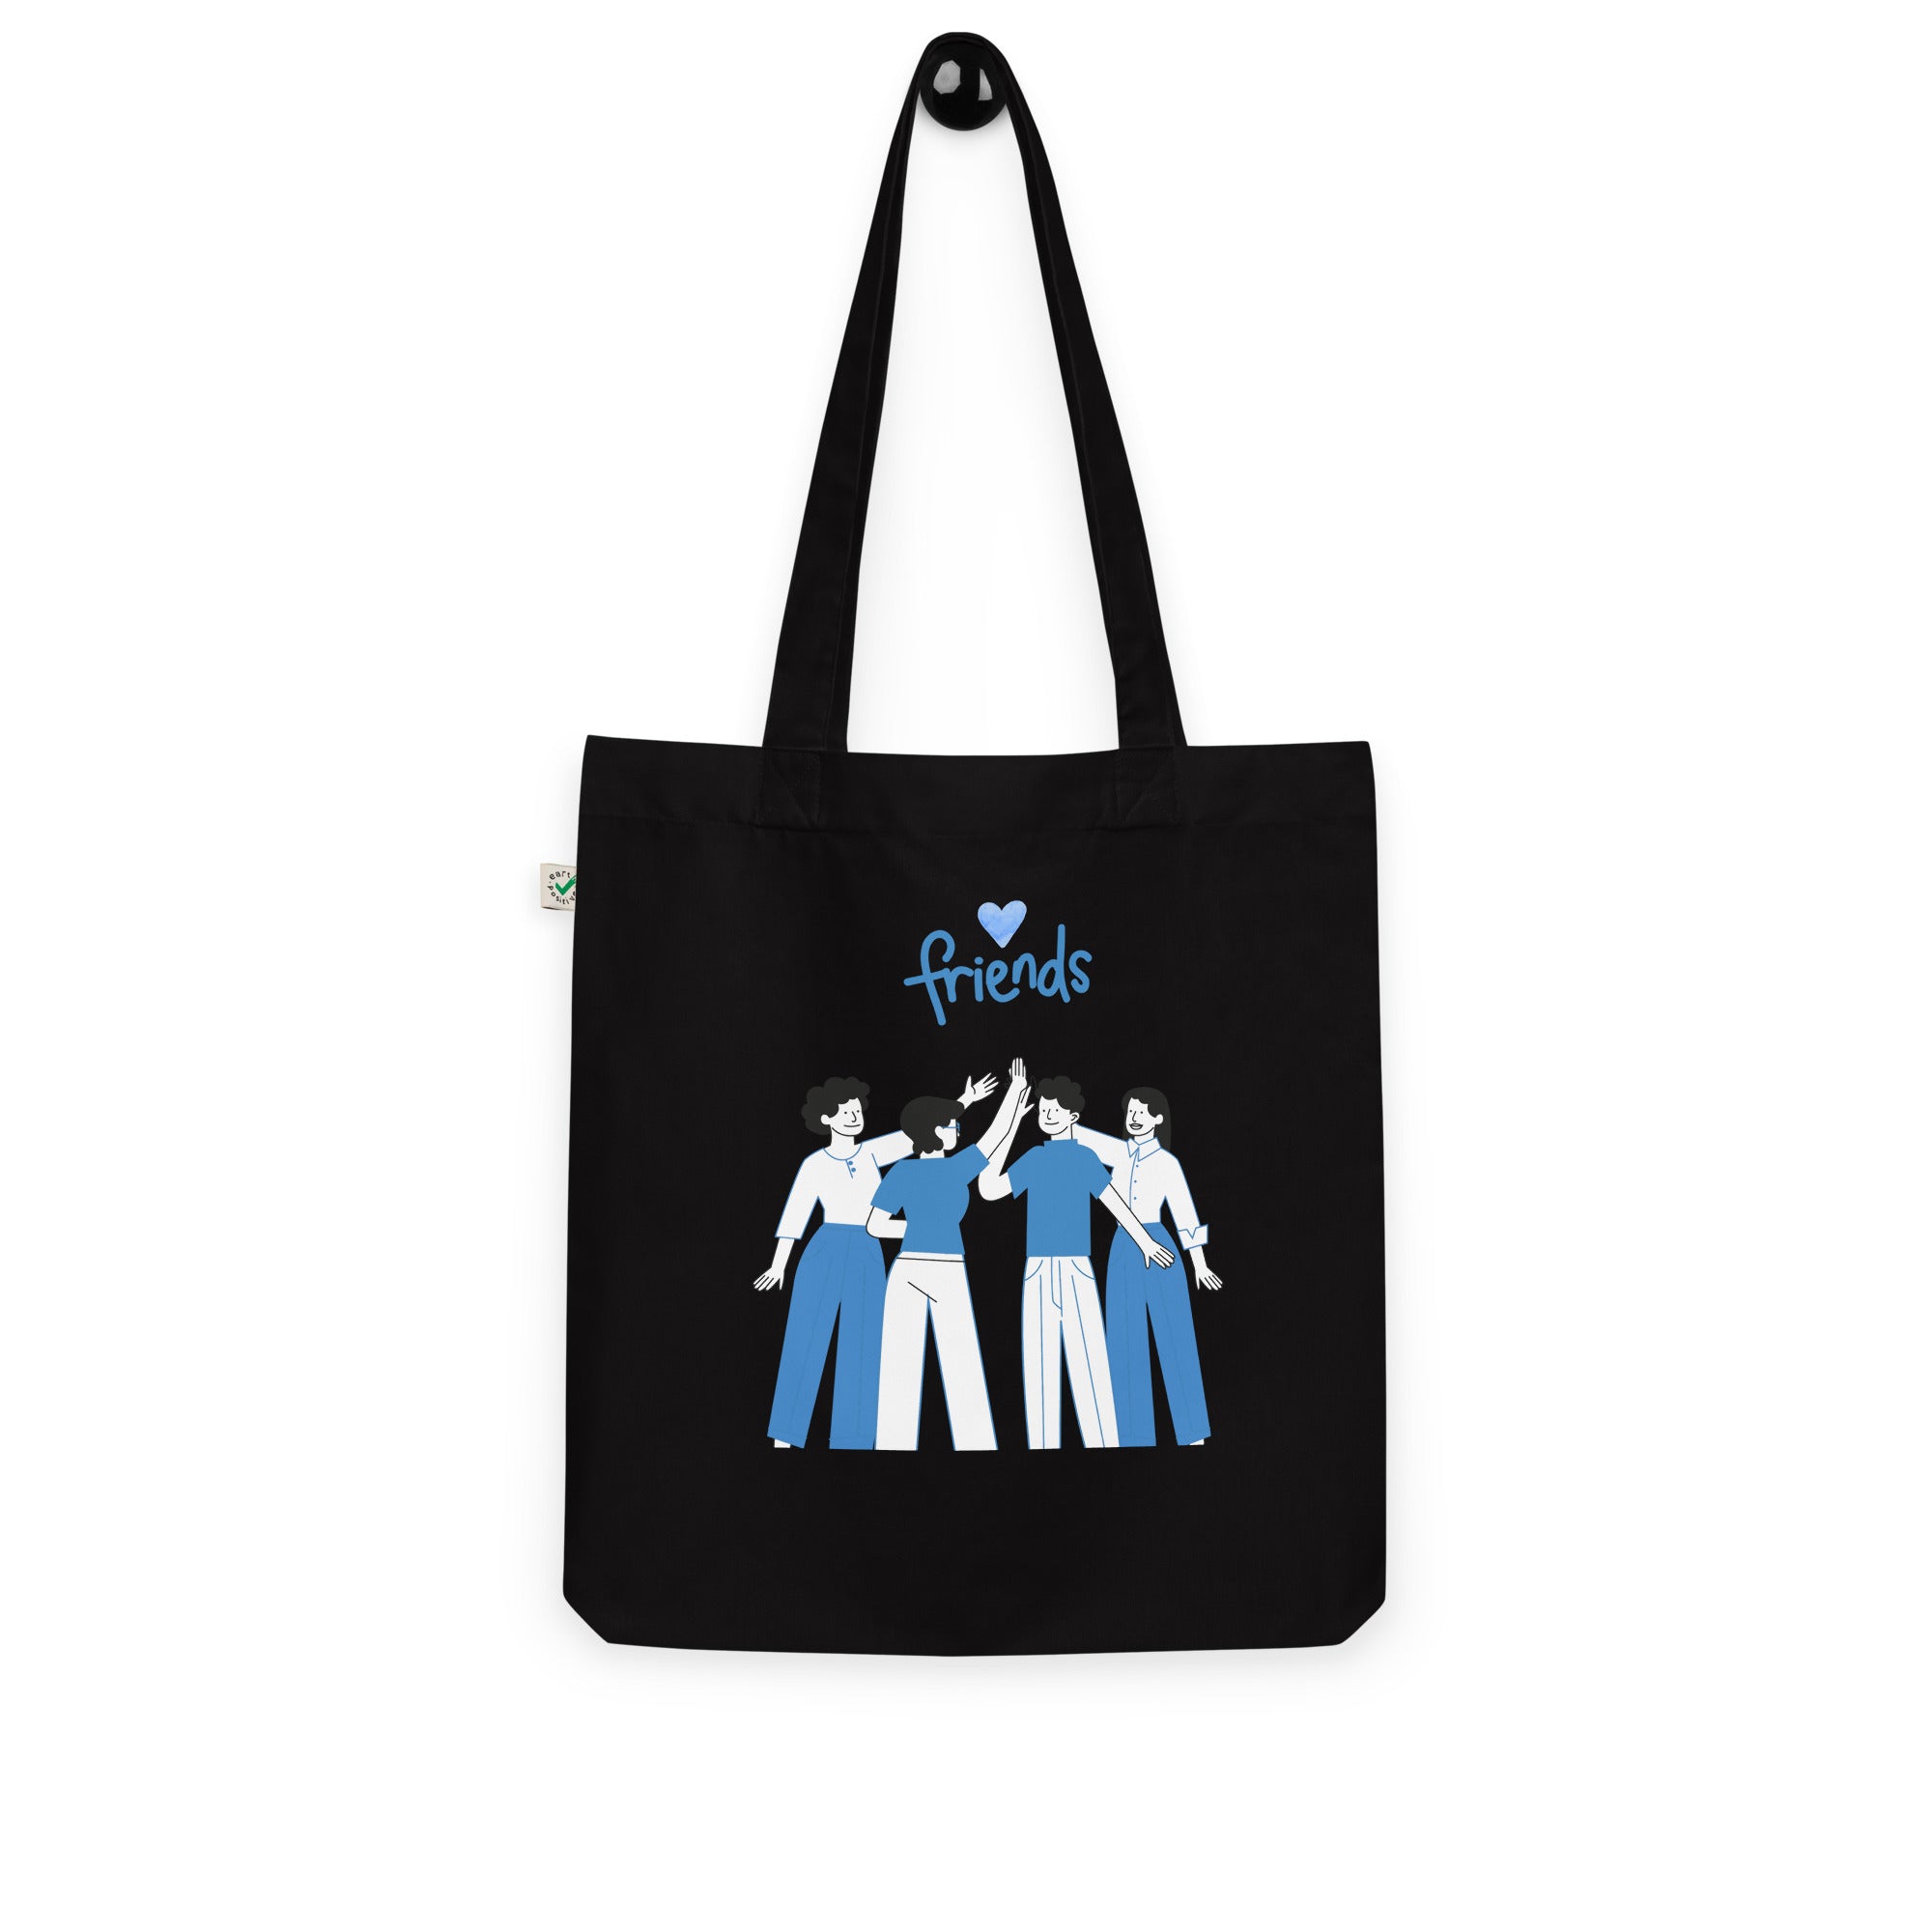 Friendship Graphic Tote Bag